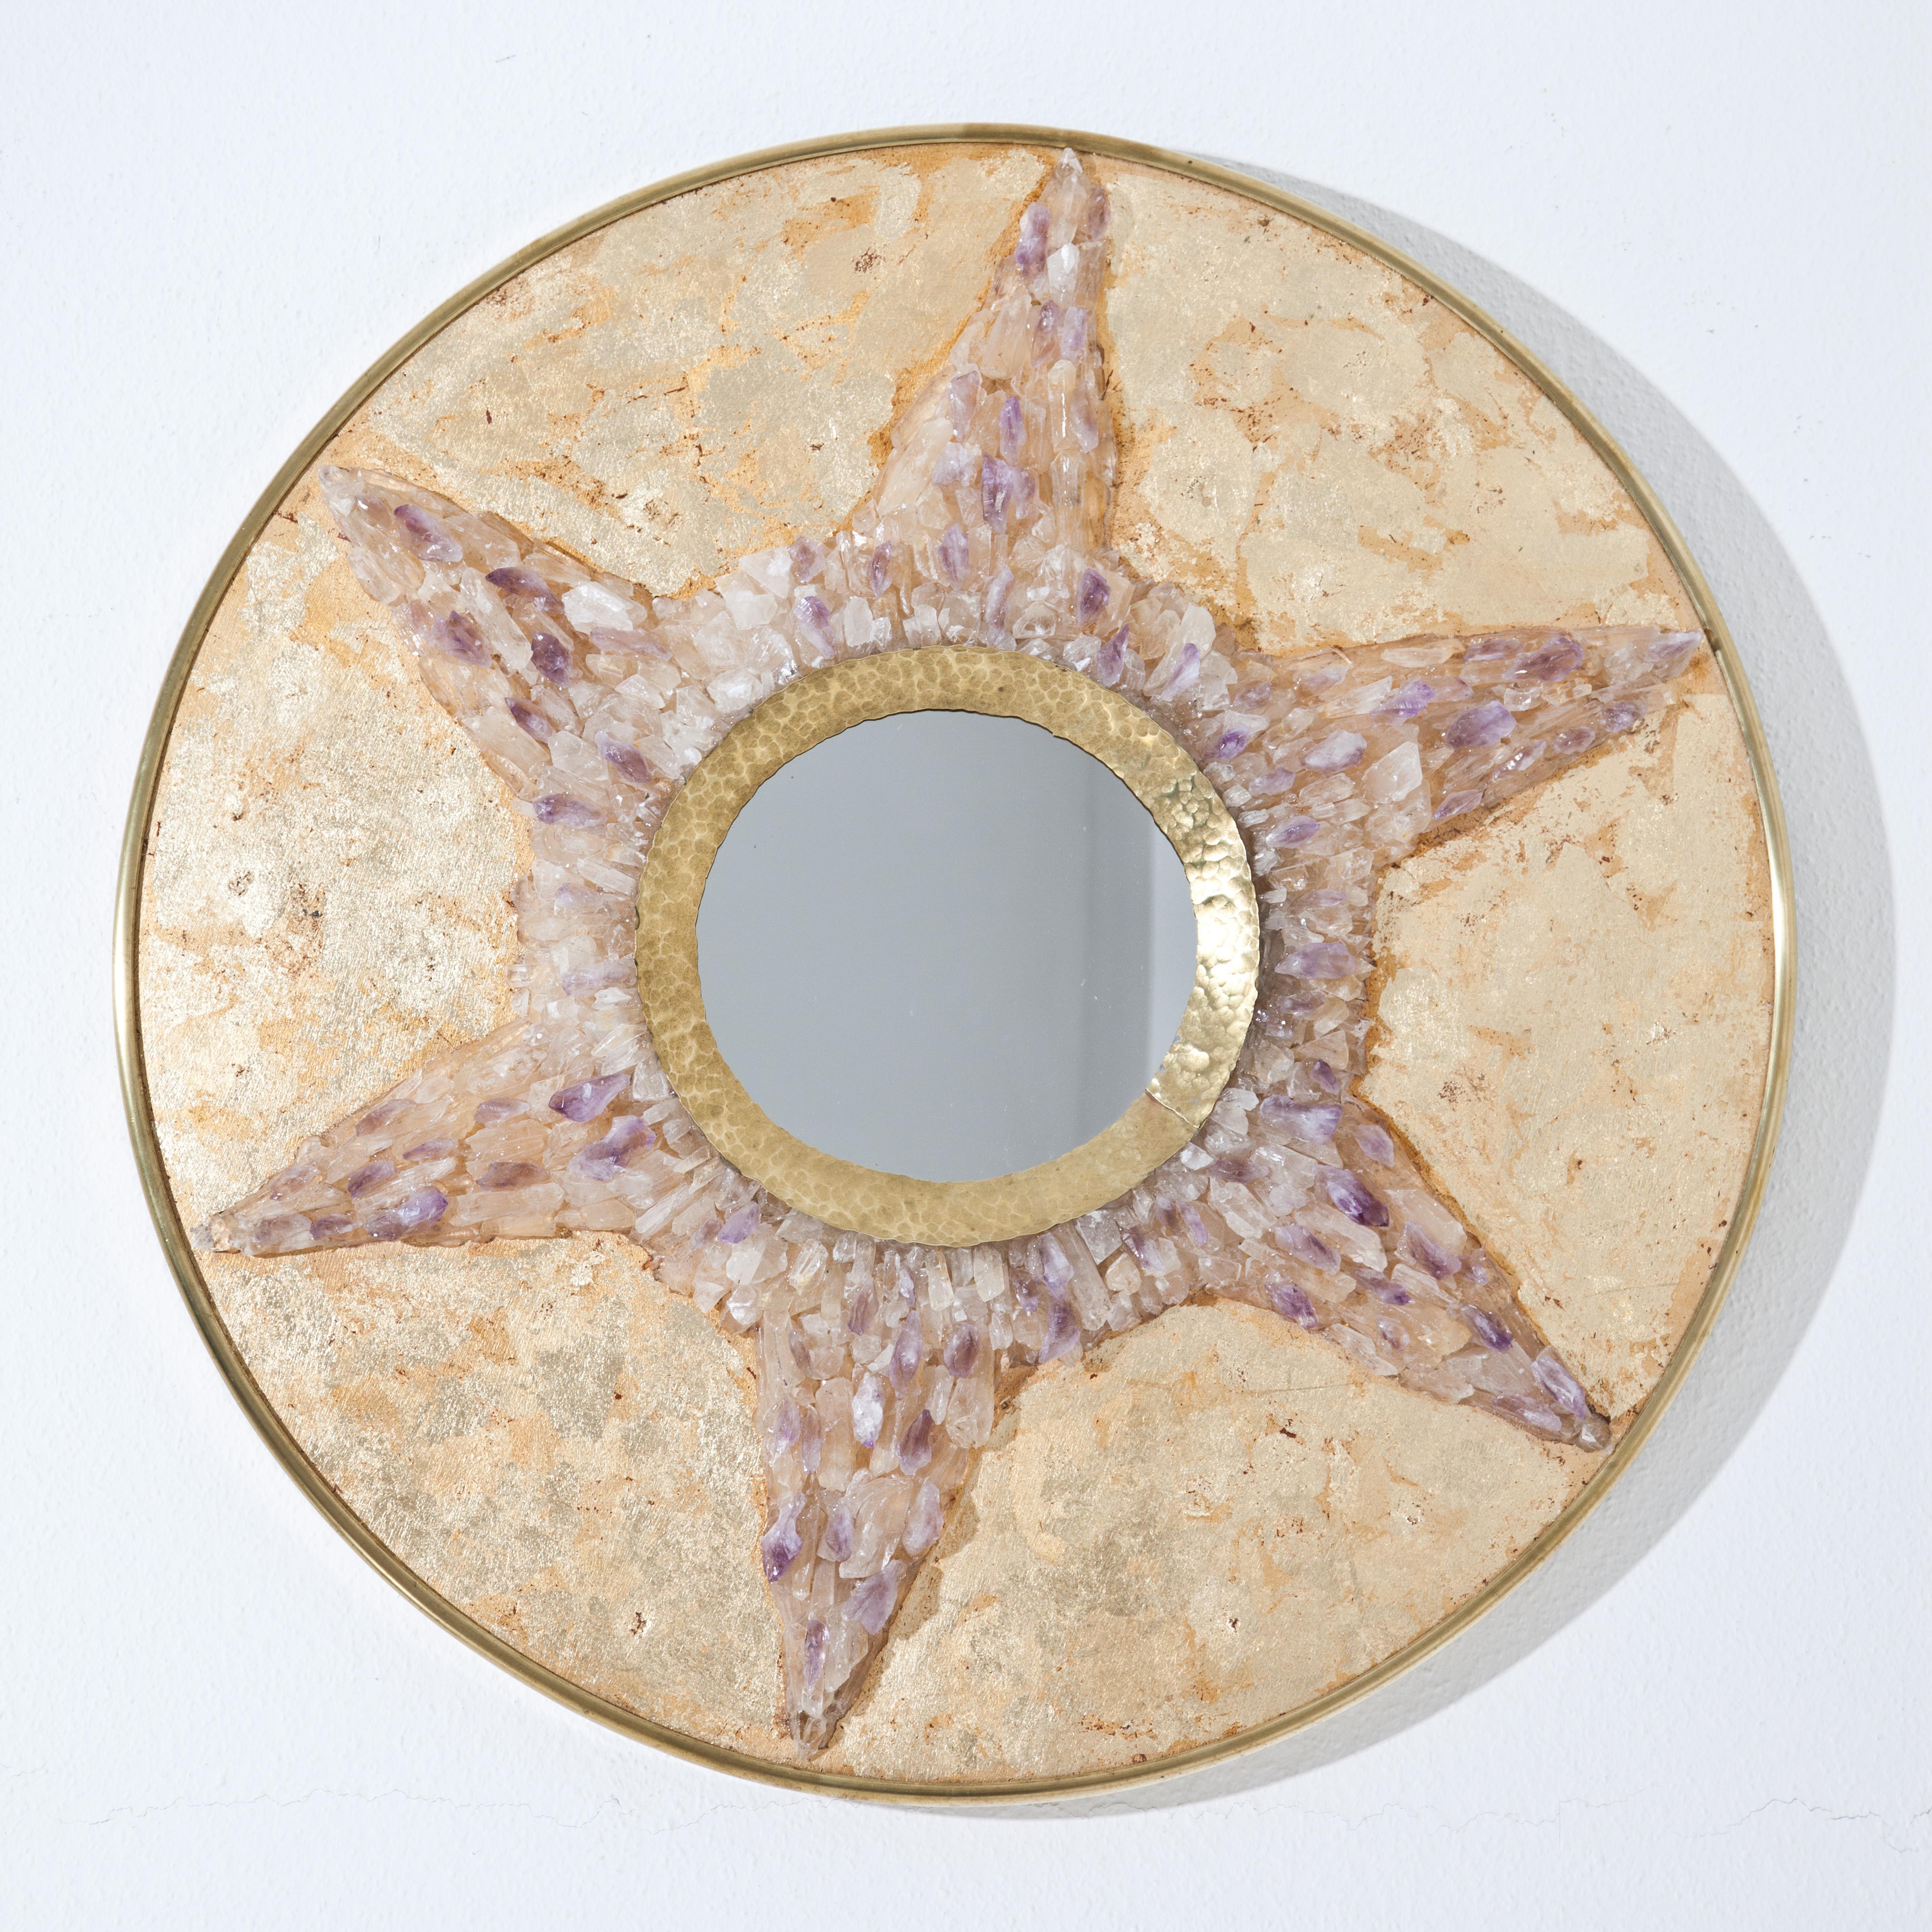 Round mirror in brass frame covered with gold foil and star-shaped decor of amethyst and rock crystal. The inner frame around the mirror glass is made of hammered bronze. On the back monogrammed EM.